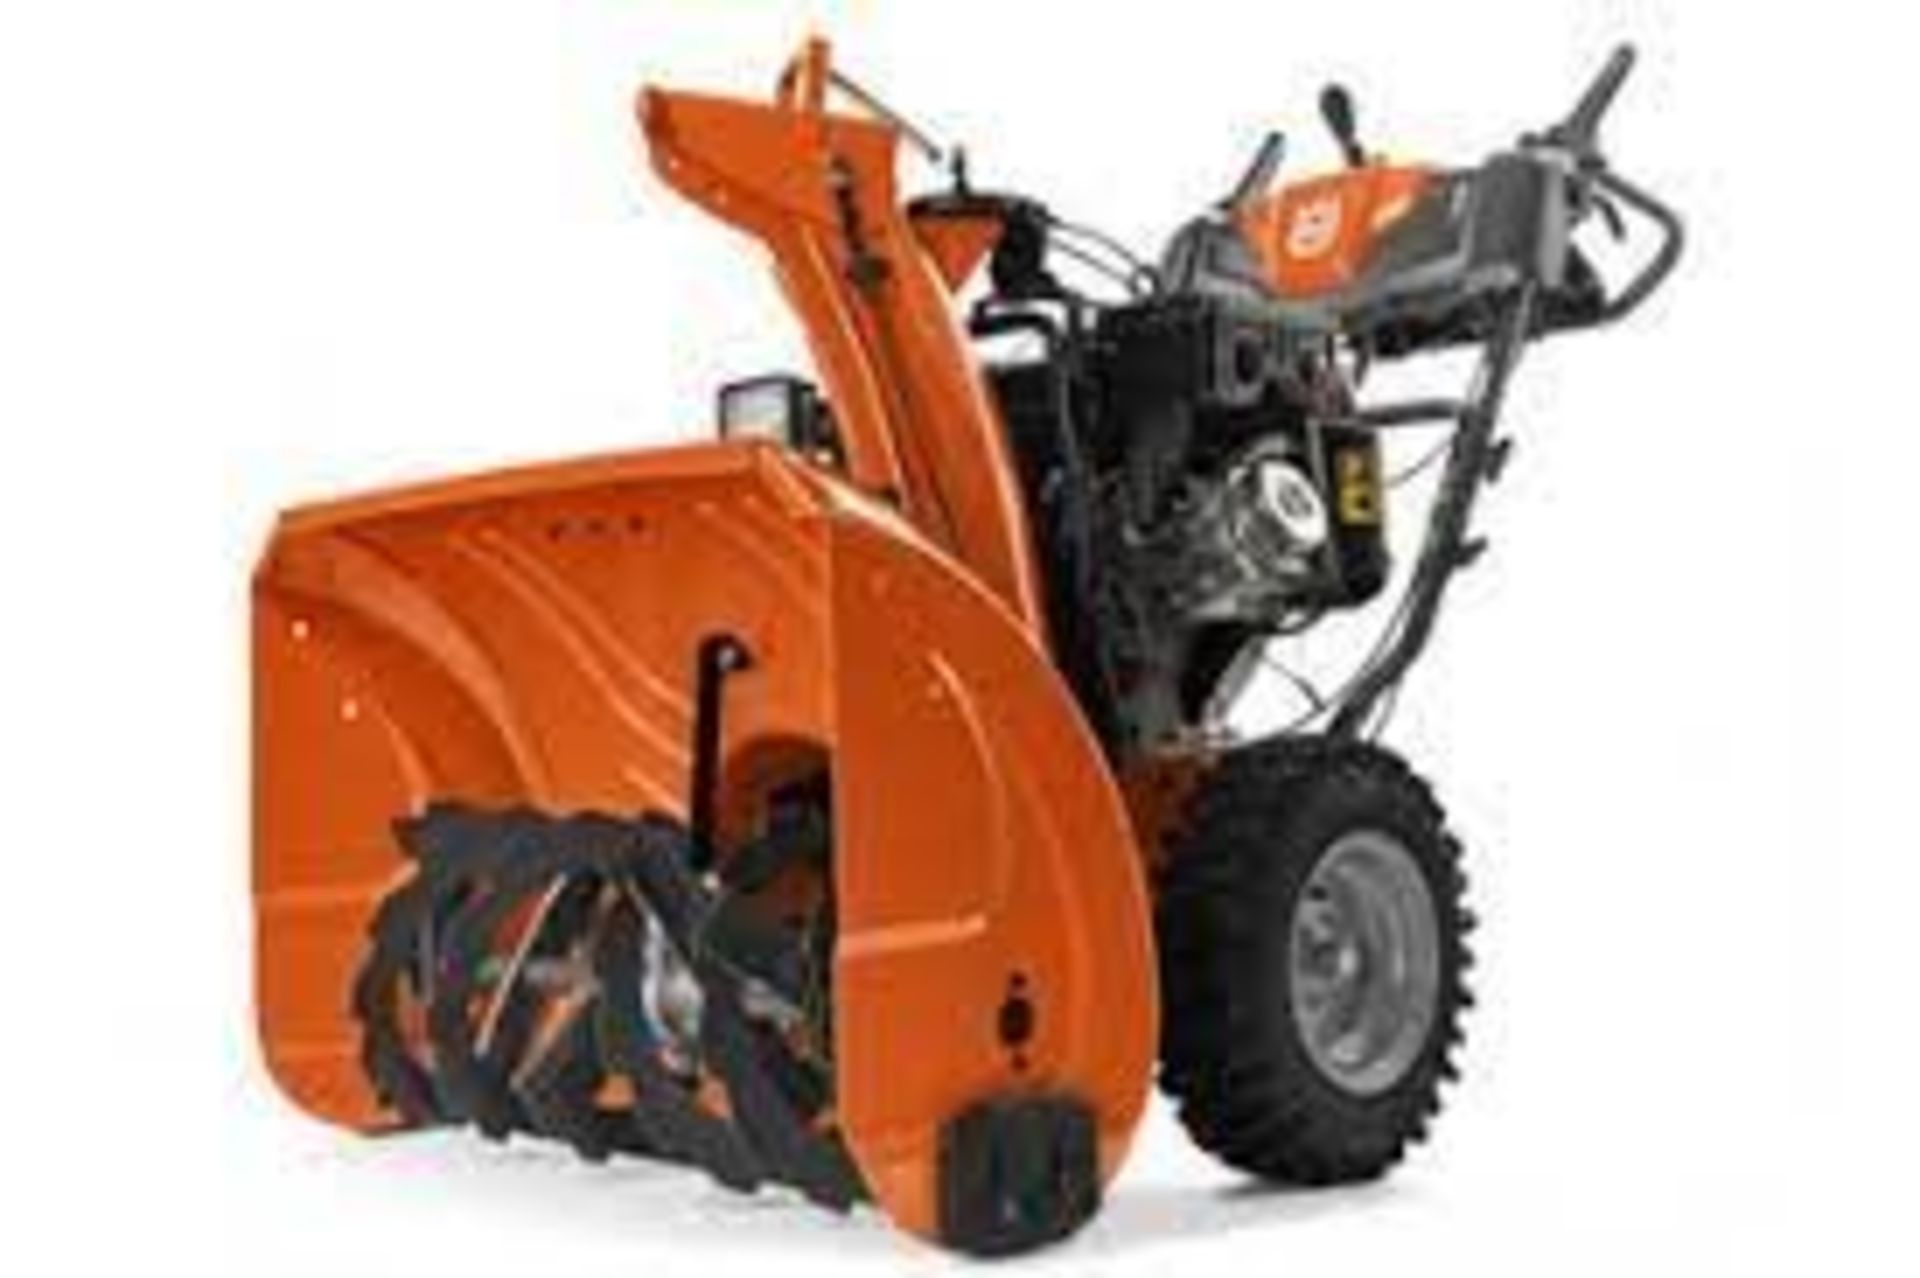 Husqvarna ST 230P Self Propelled Snow Blower - Approx. MSRP $1299 - Image 3 of 4